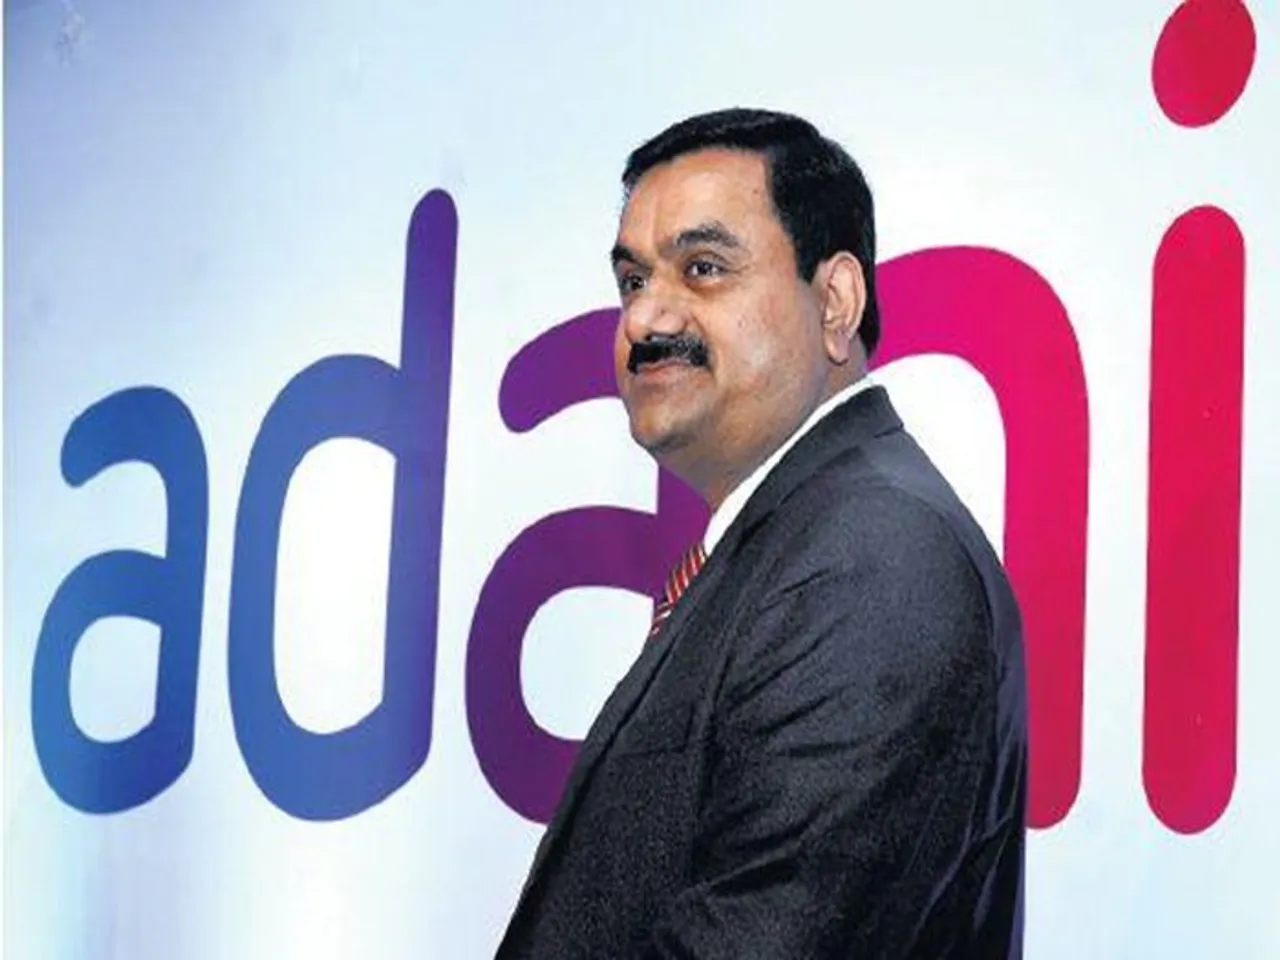 Adani Signed Special Agreement With Airports Authority